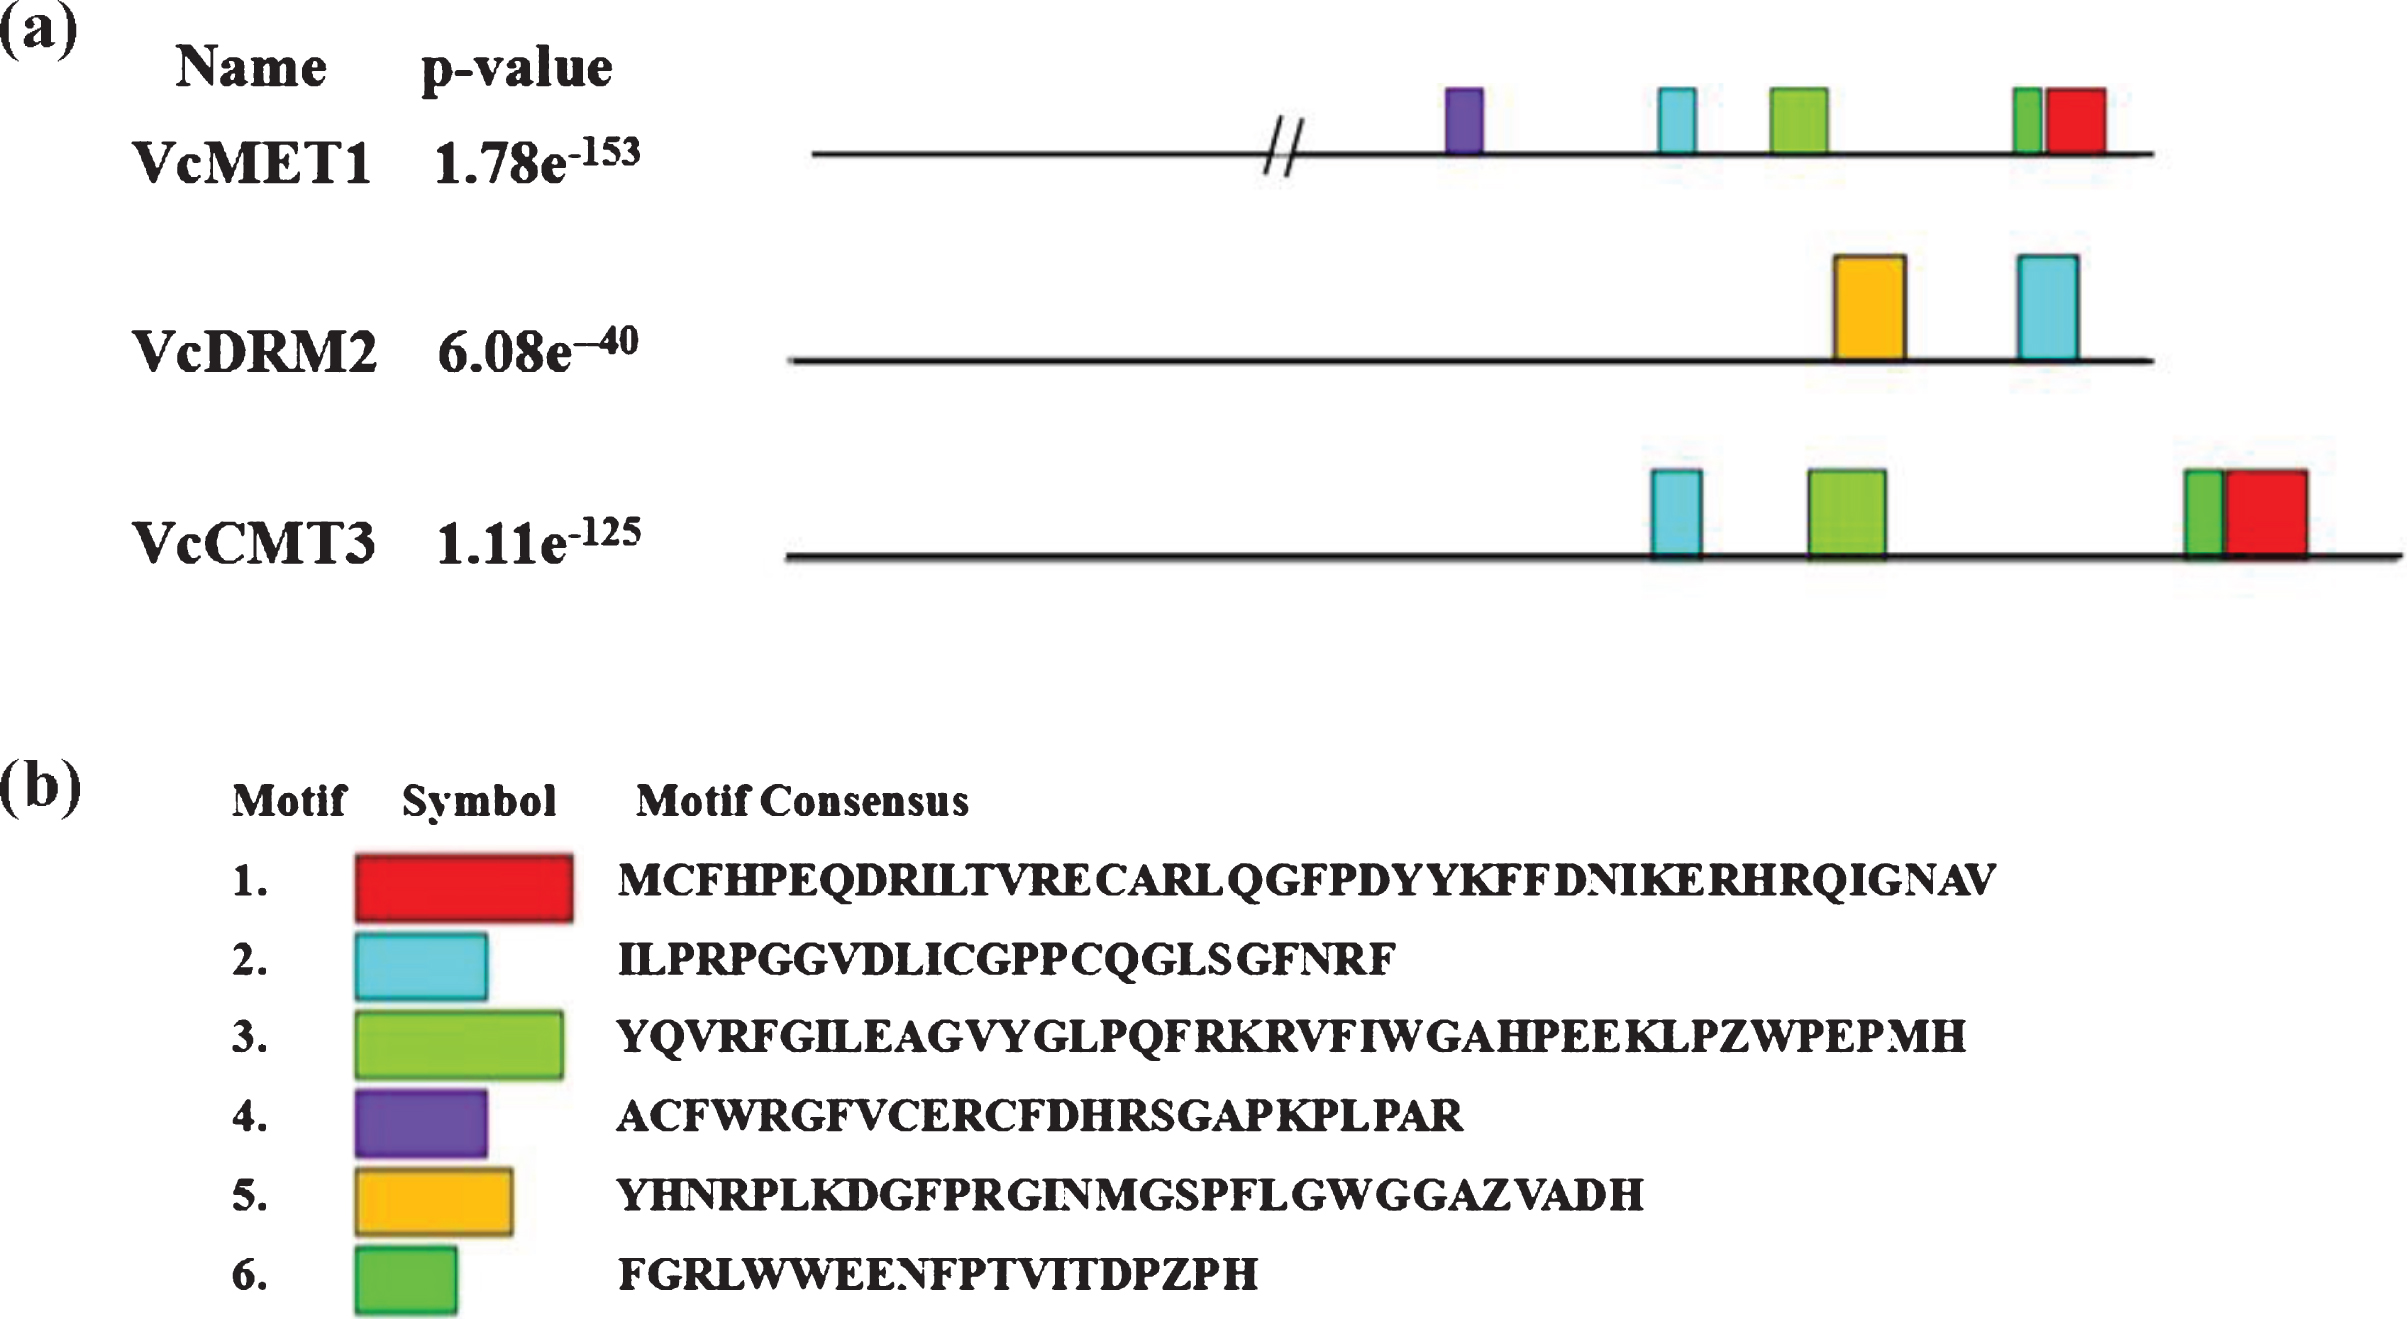 MEME generated conserved structures and sequences from isolated V. corymbosum DNA methylation-related proteins.